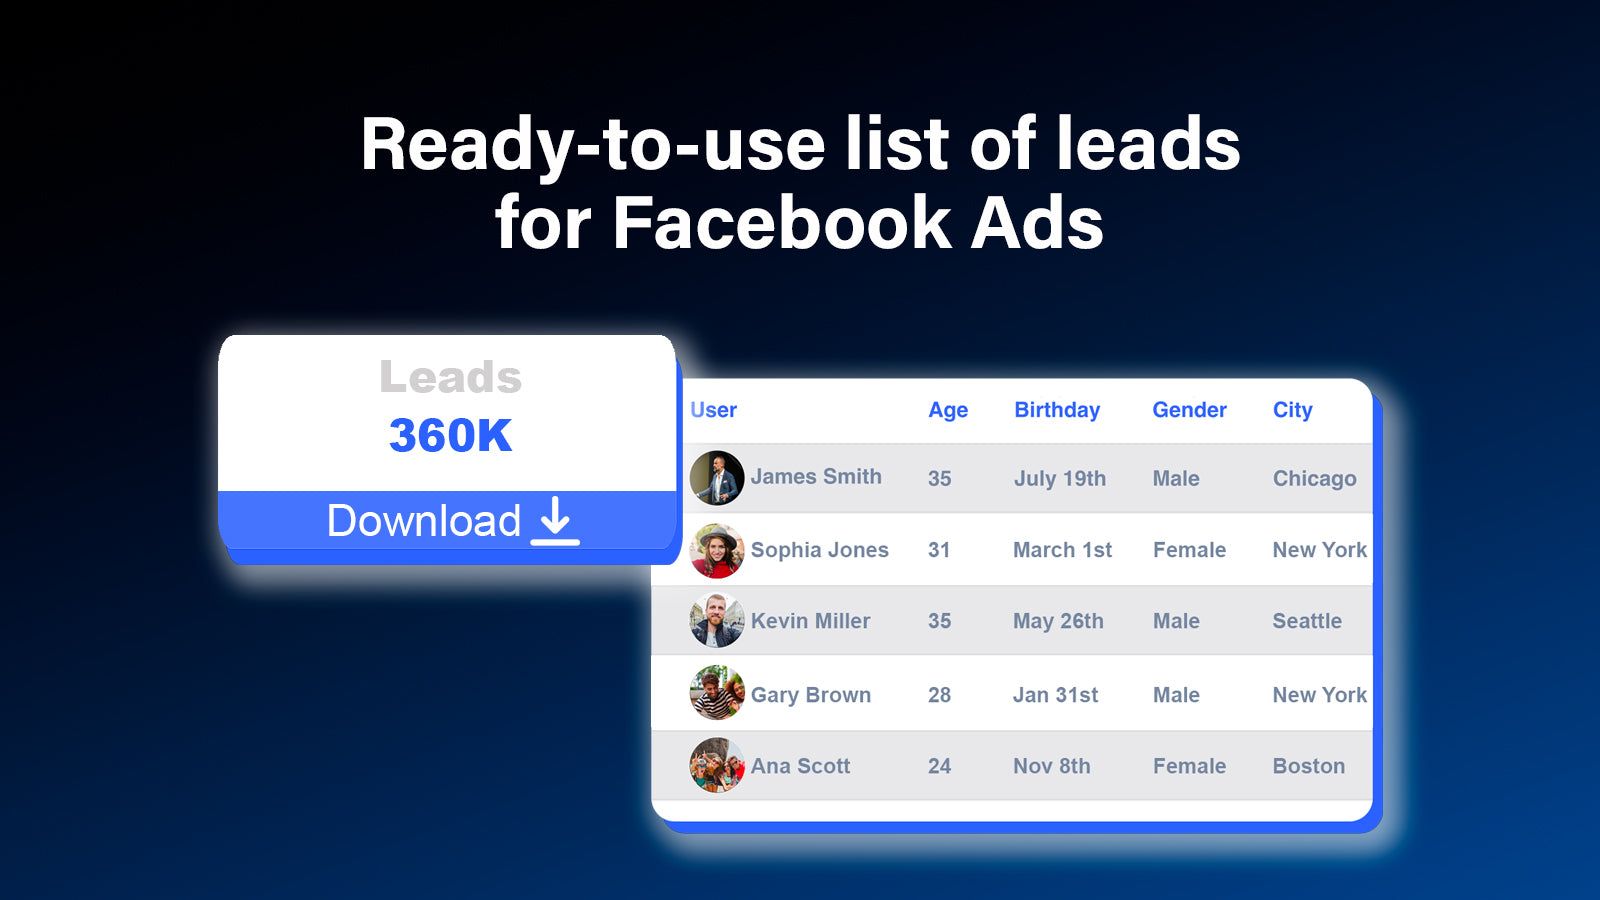 Ready-to-use list of leads for Facebook Ads